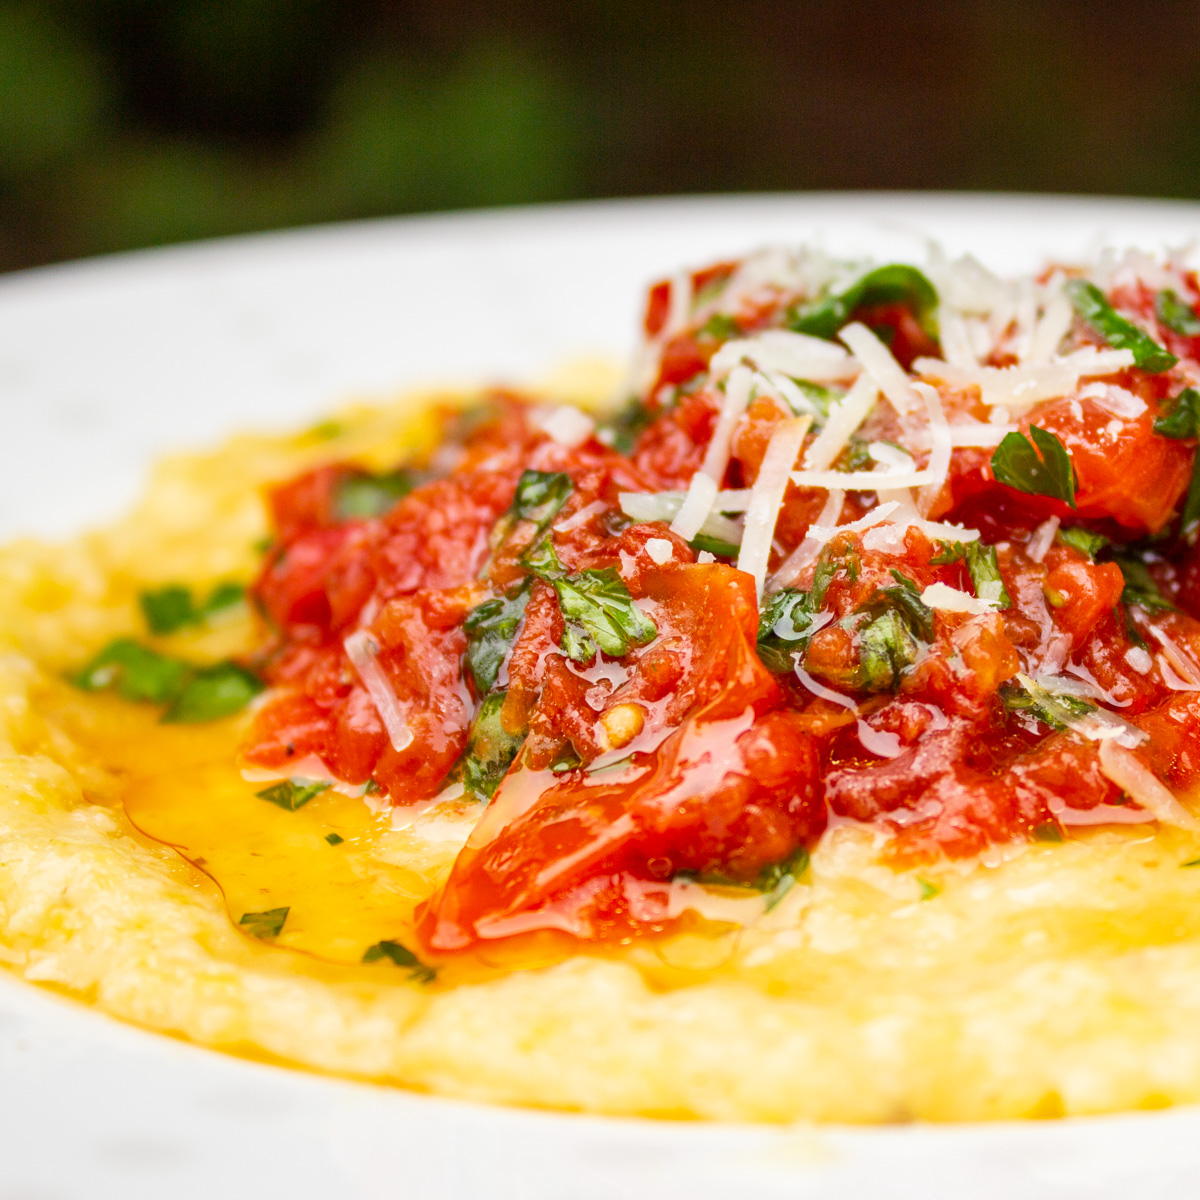 polenta topped with tomato salad on plate